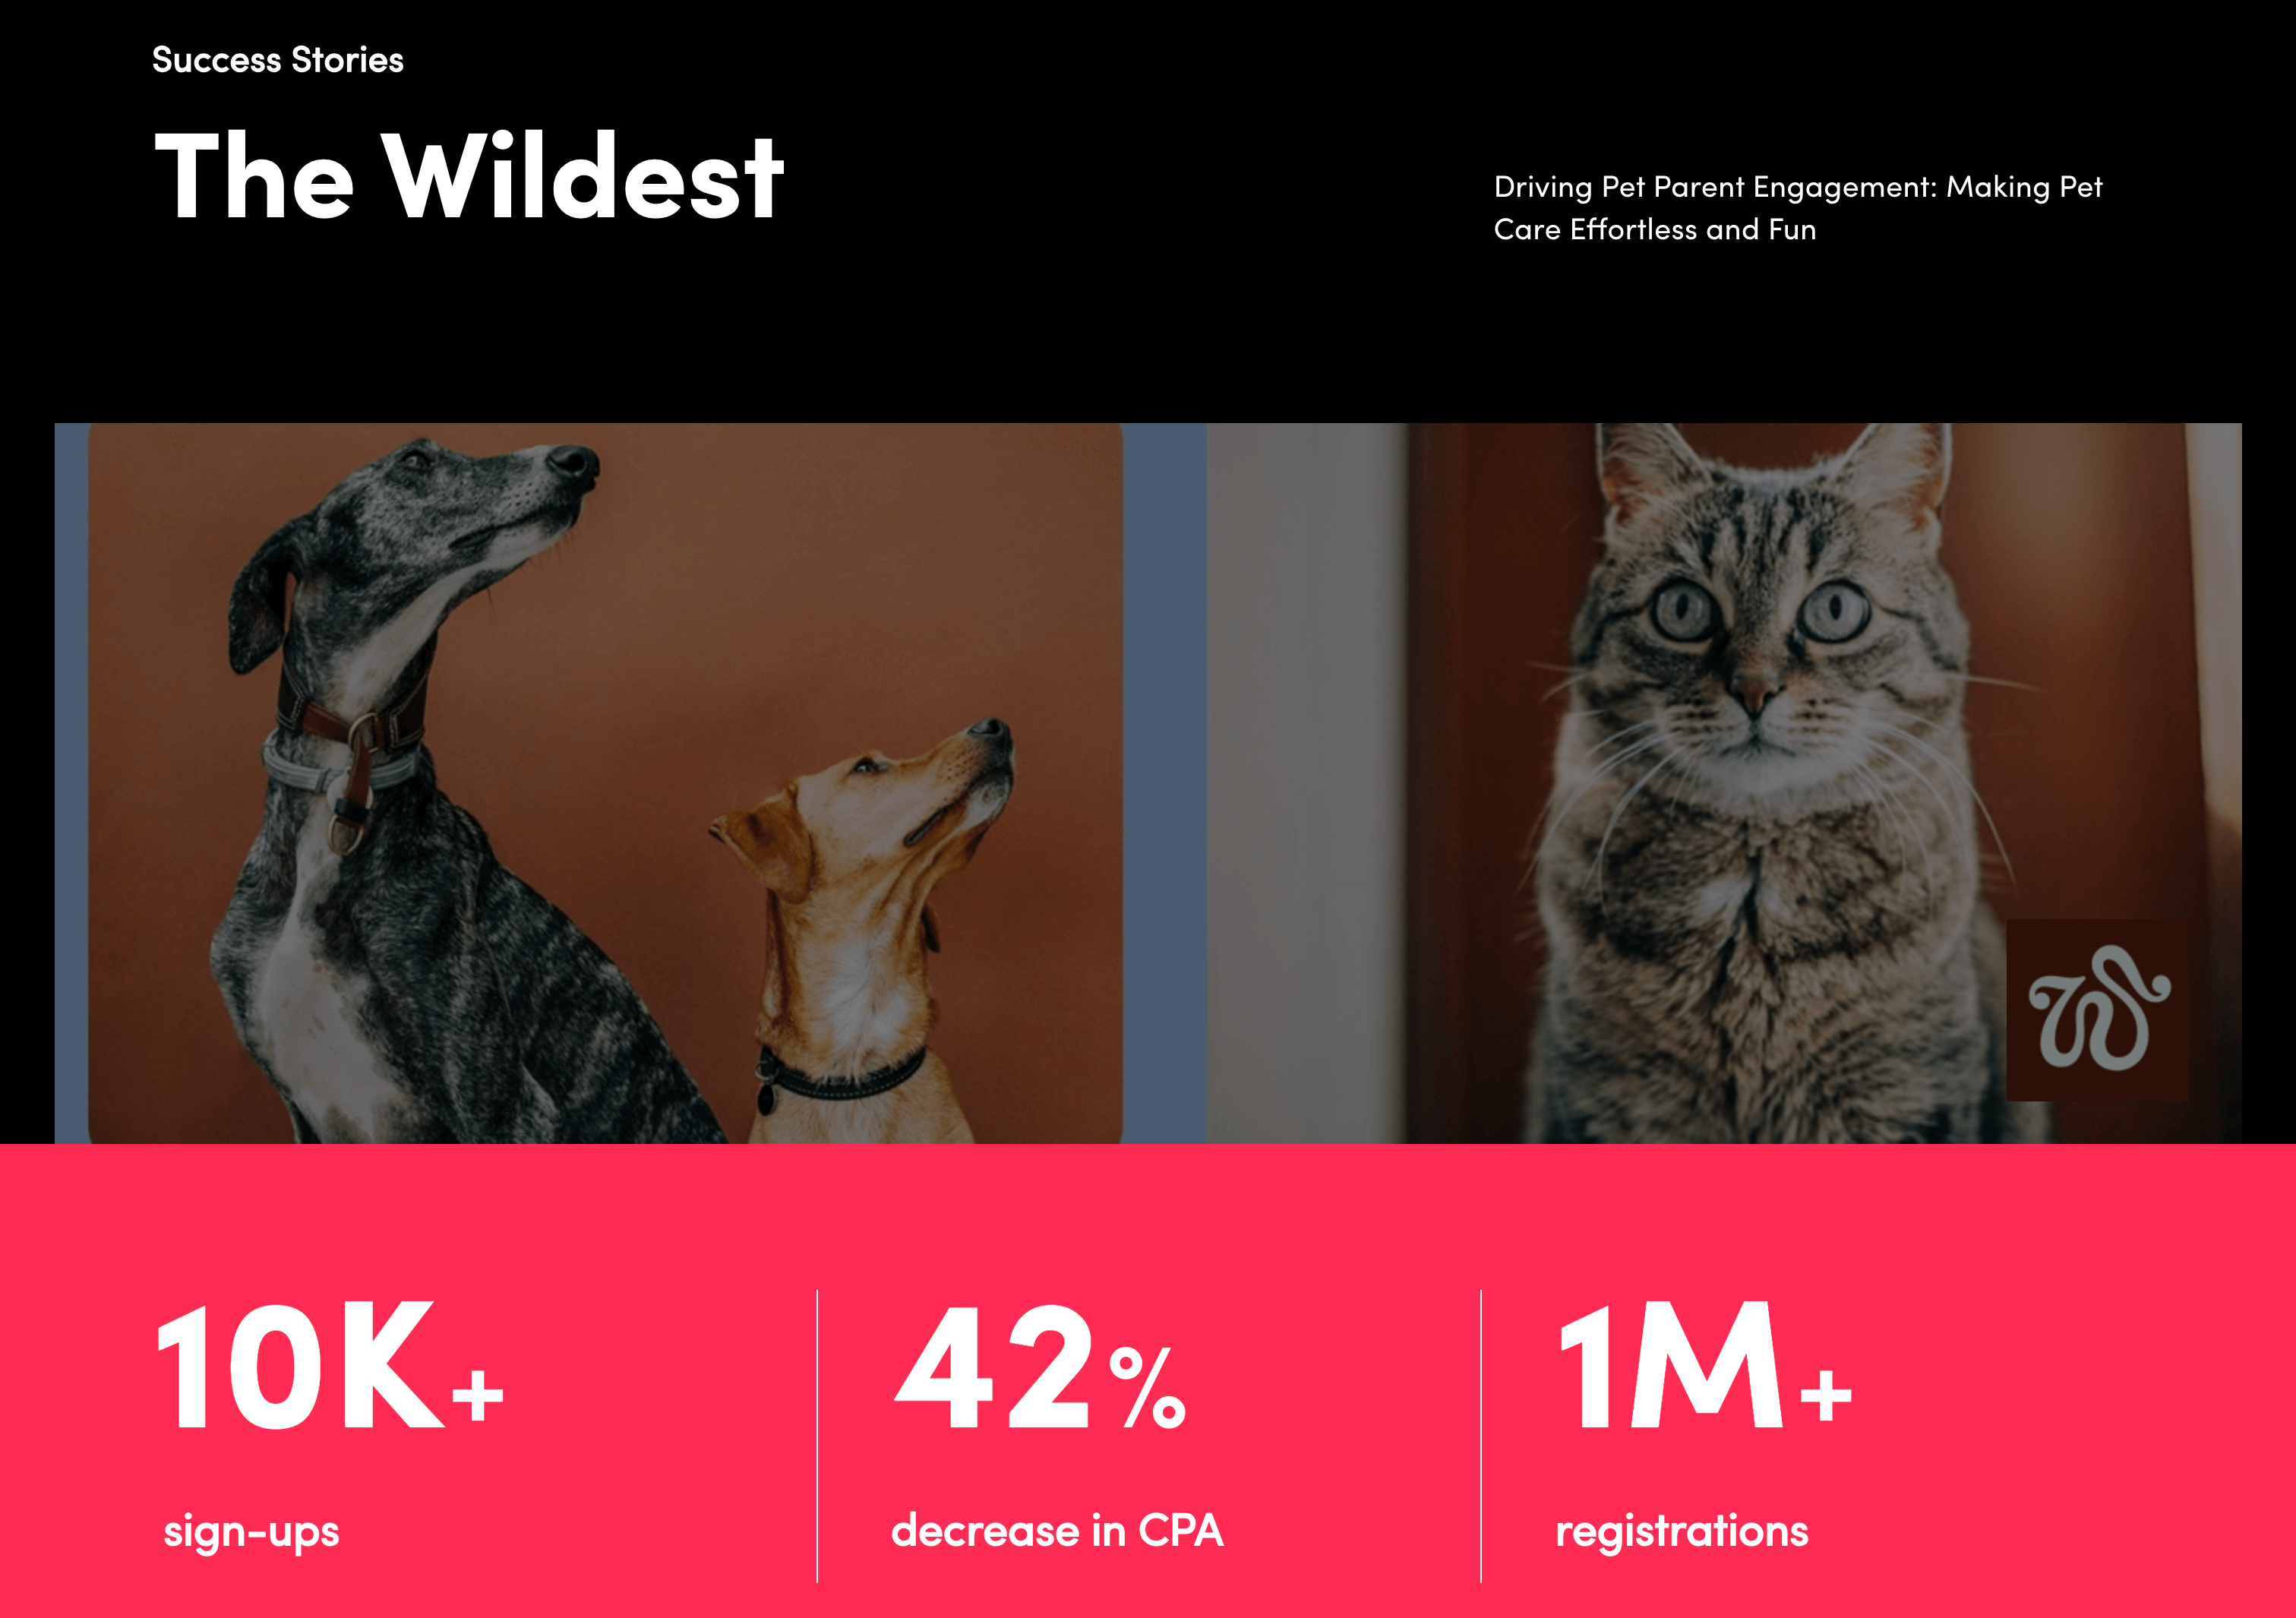 TikTok for business success story The Wildest with the motto "Driving pet parent engagement" and results like 10k+ sign-ups, 42% decrease in CPA and 1M+ registrants.